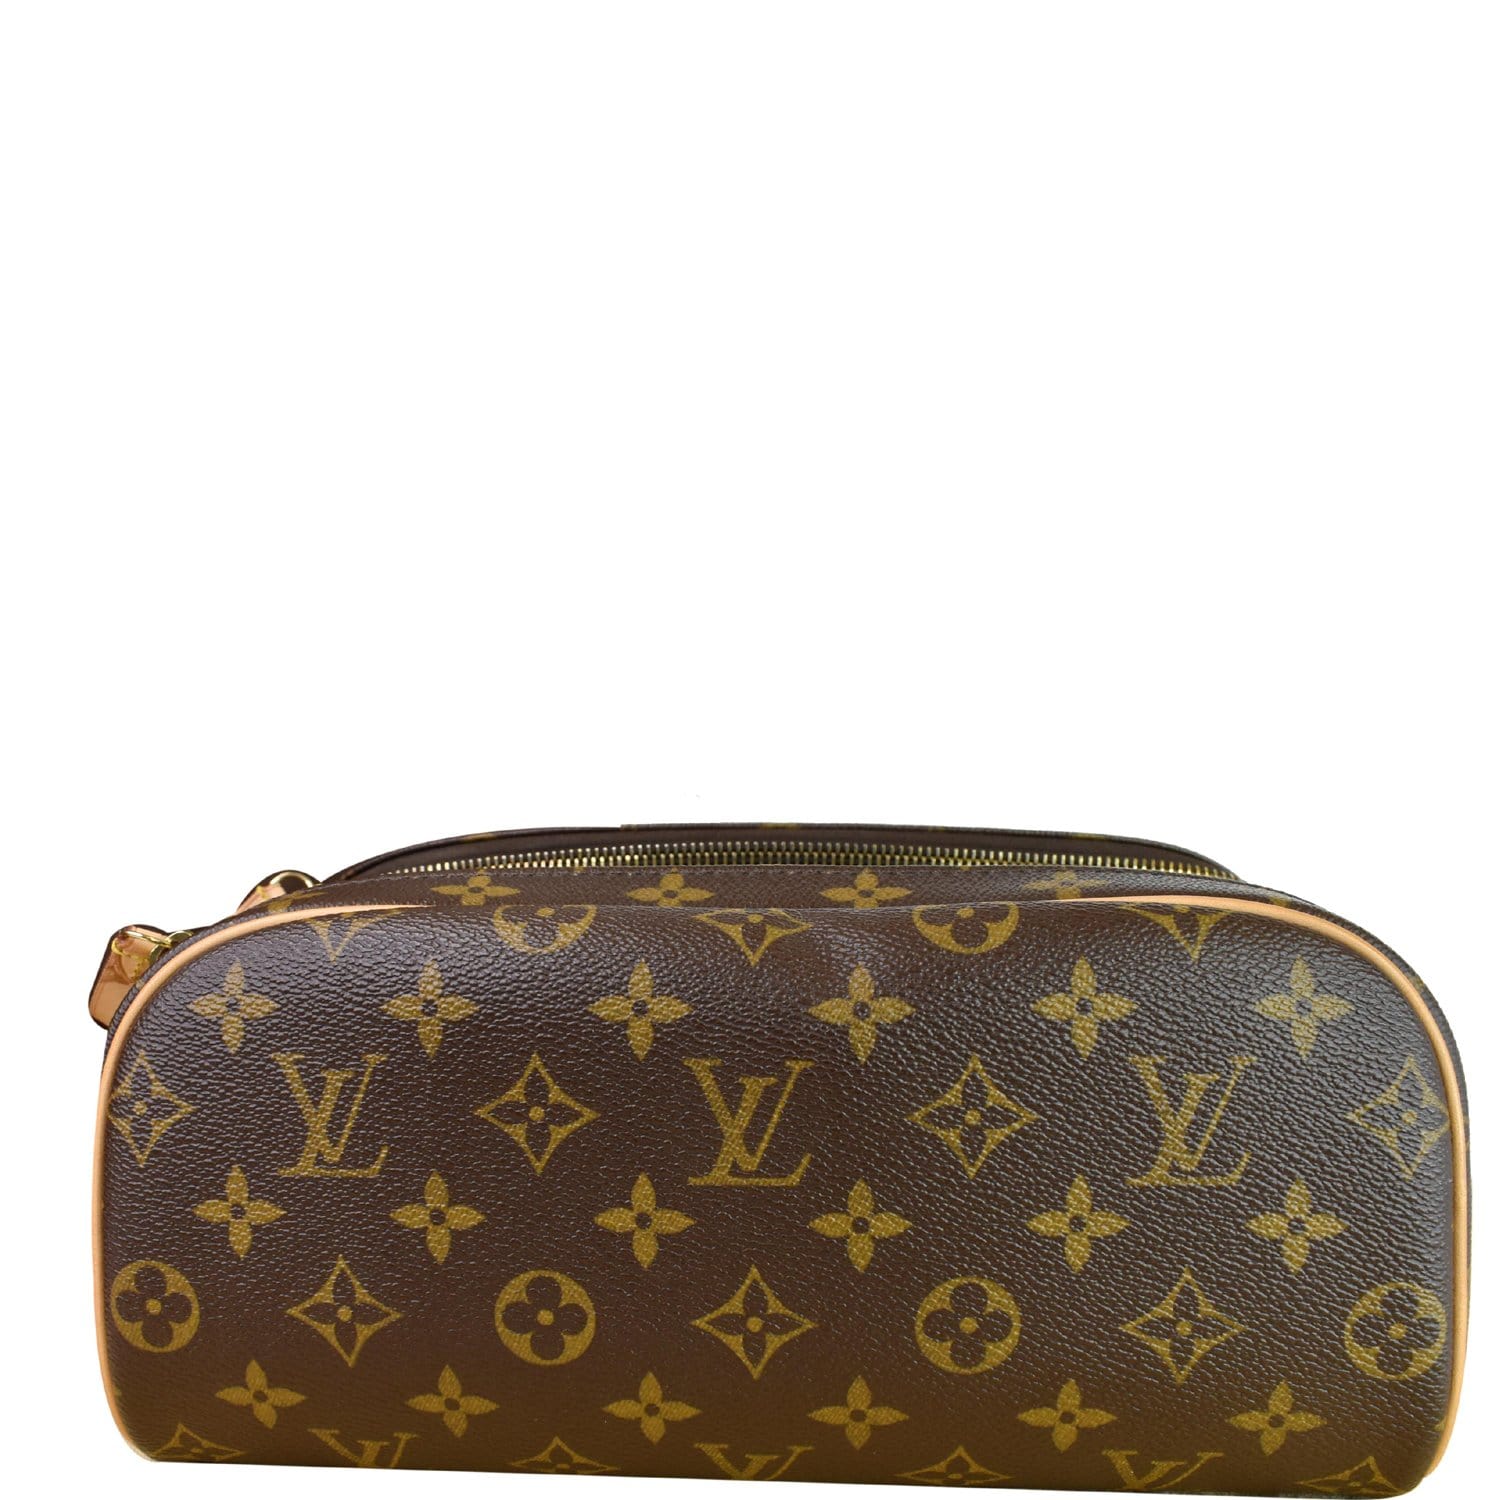 Louis Vuitton's “Brown and Beige Damier”, and Michael Kors